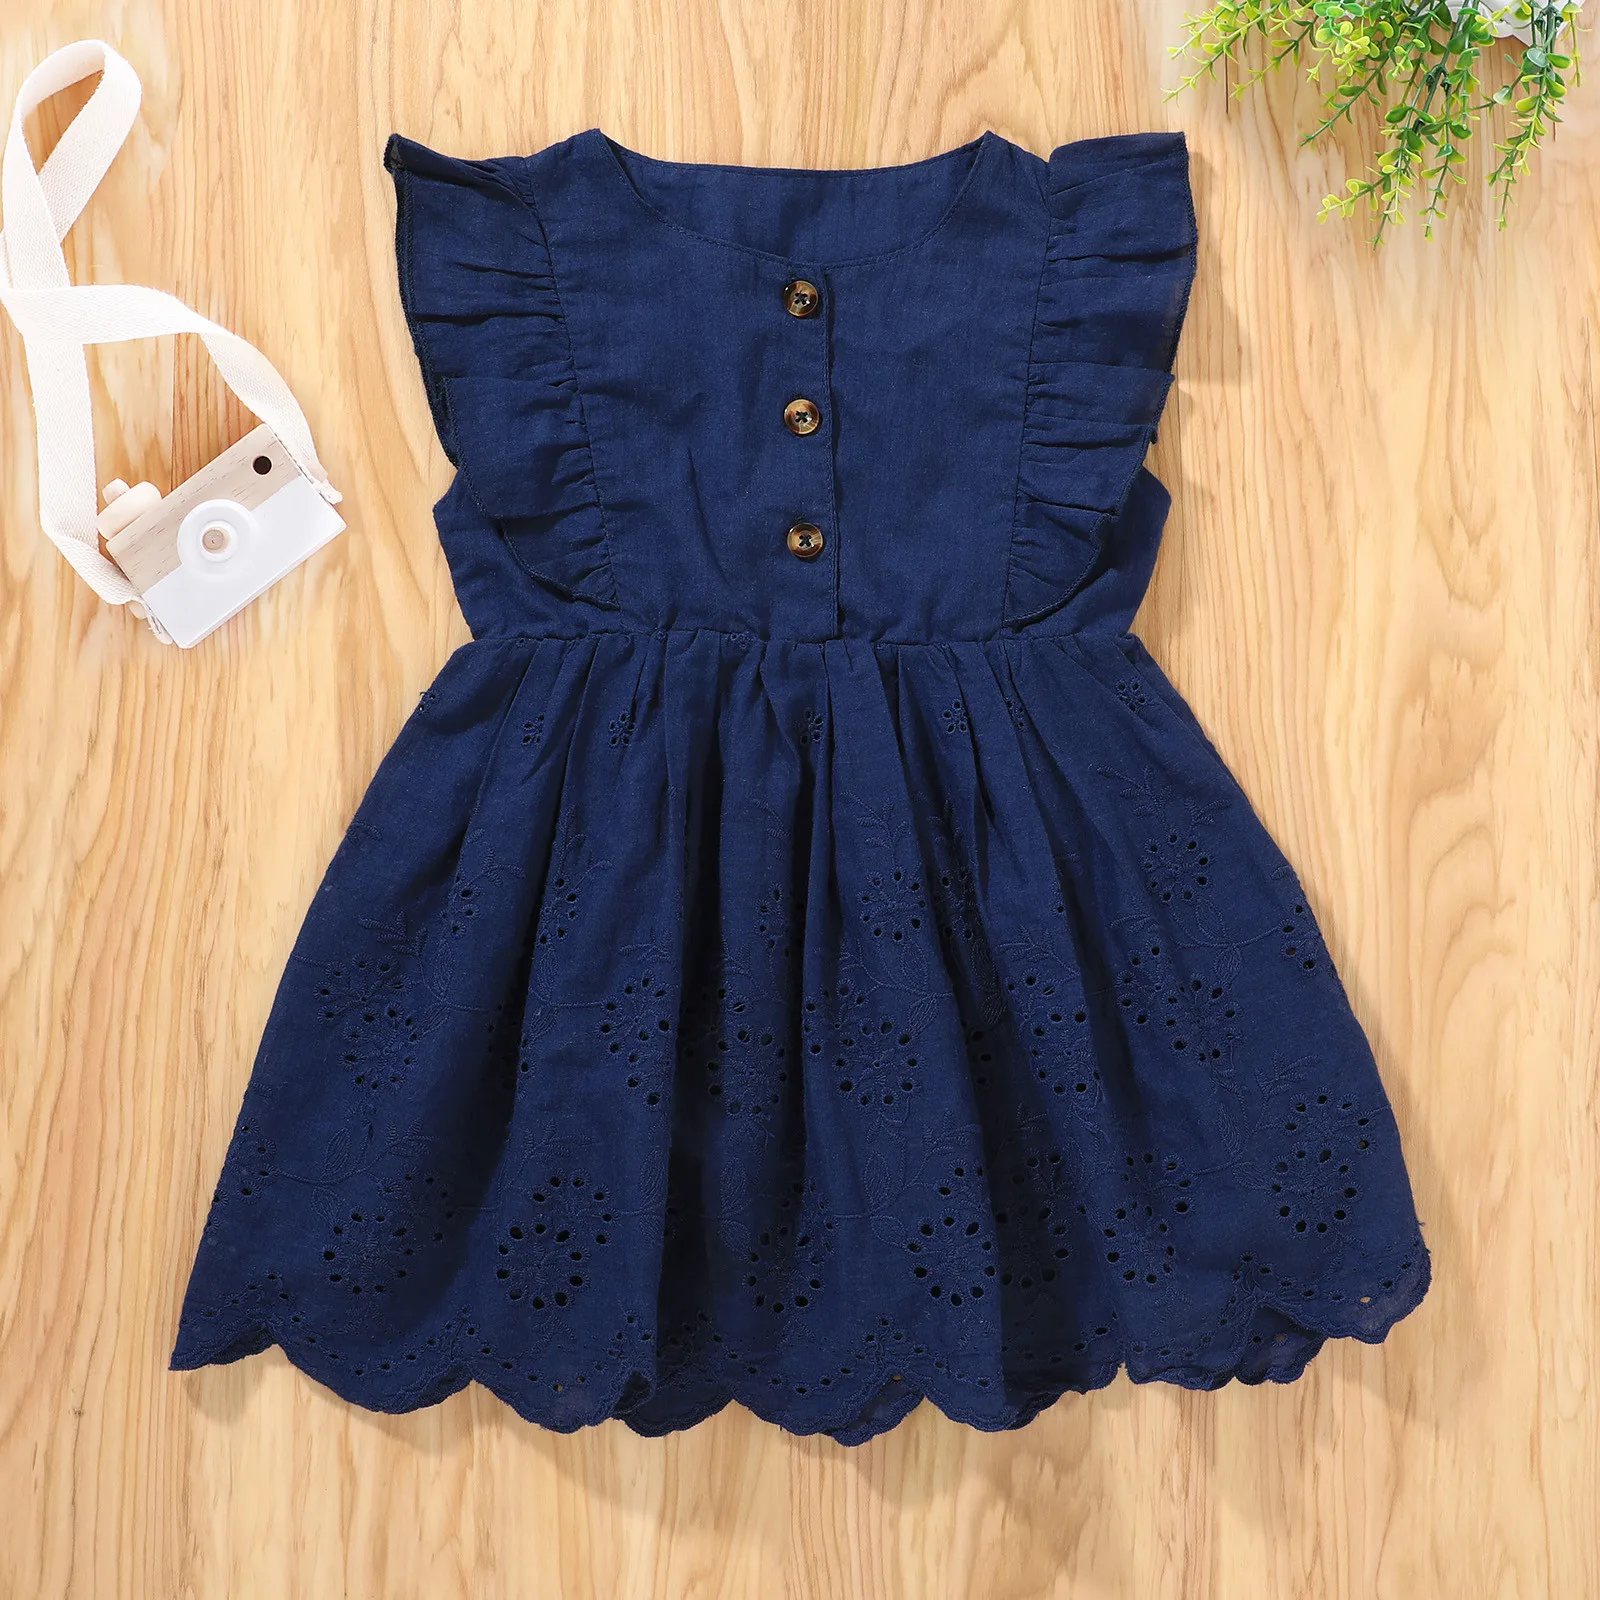 

Baby Summer Sundress, Solid Color Sleeveless Flounce Jumper Skirt with Buttons for Toddler Girls, Children Casual Dresses